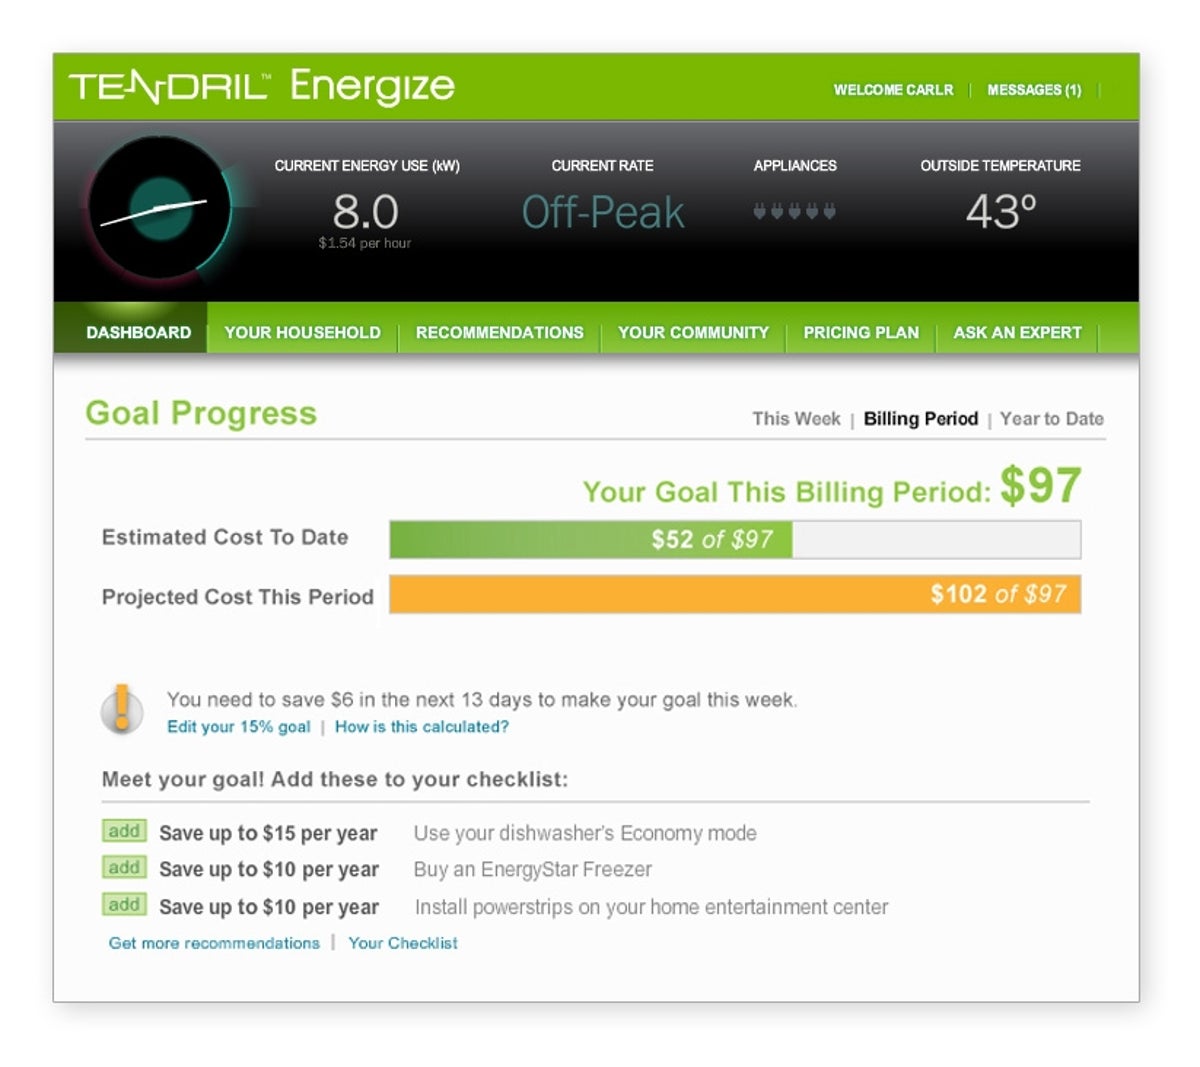 Tendril's Energize is a Web-based application for tracking energy use and efficiency steps